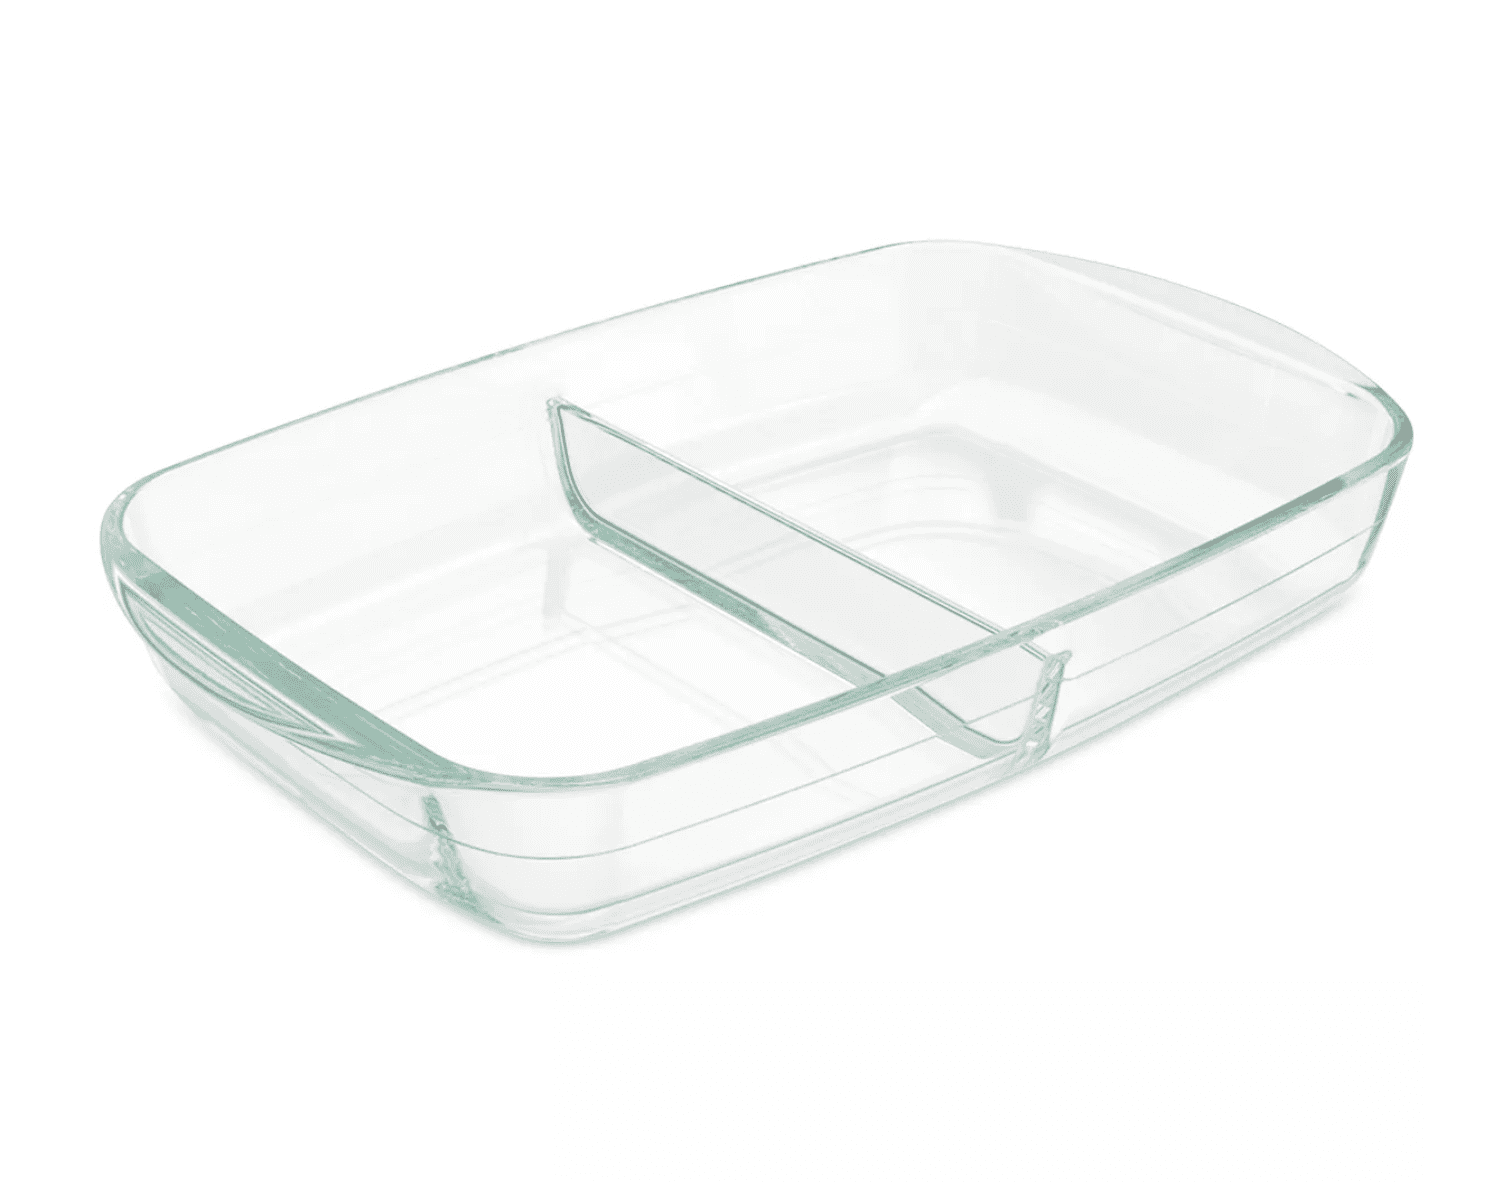 http://cdn.apartmenttherapy.info/image/upload/v1679668548/commerce/Macys-Pyrex-Divided-Glass-Baking-Dish.png